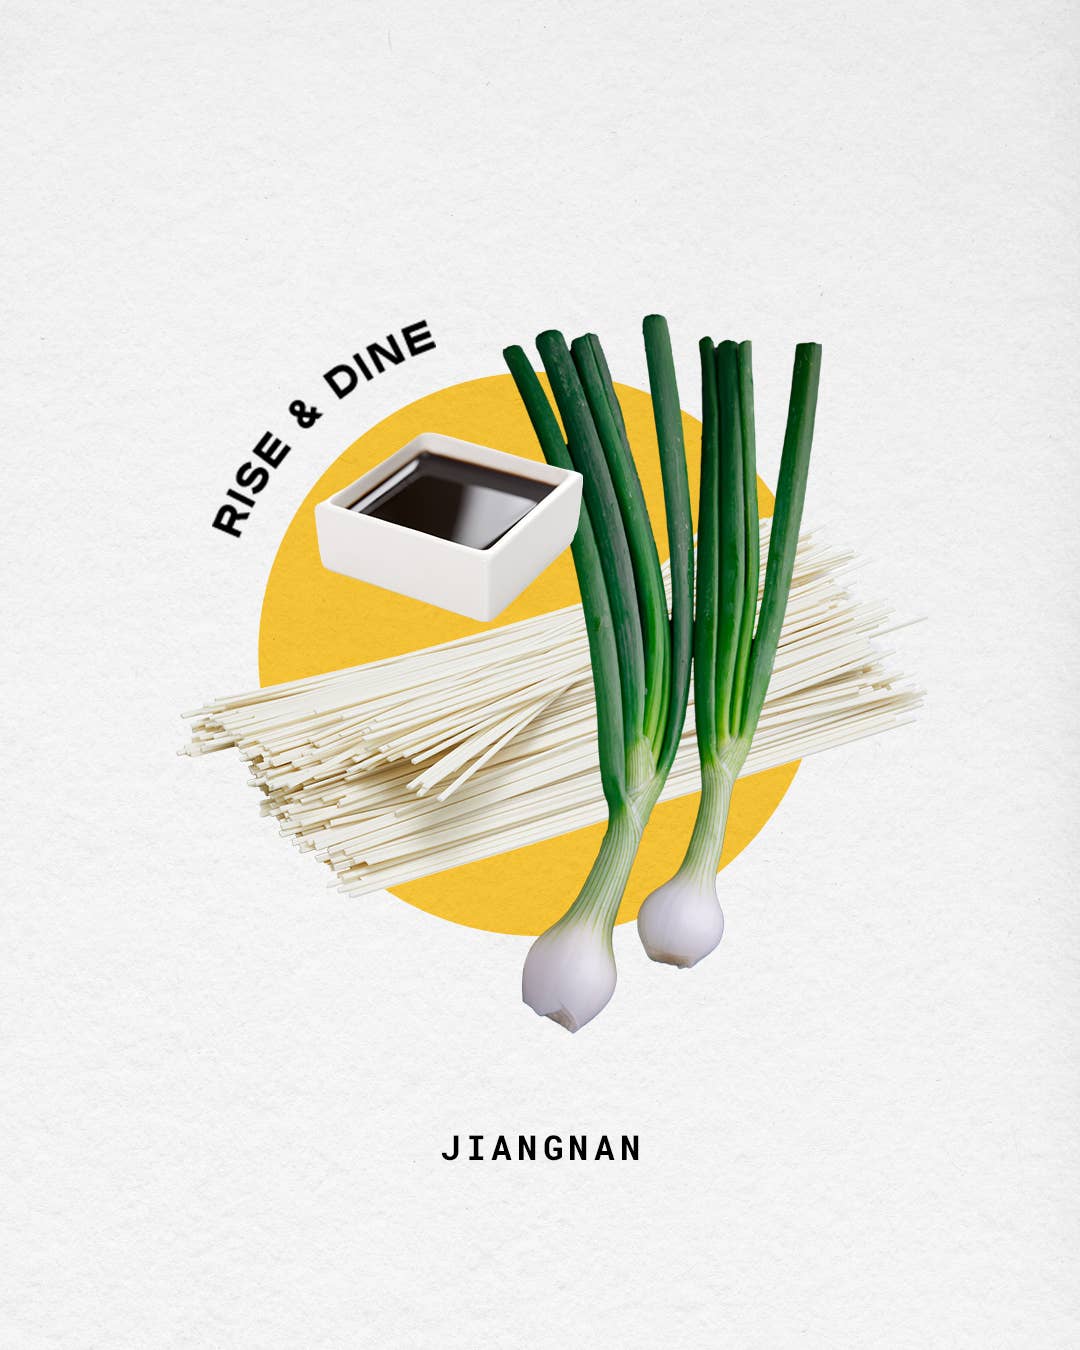 Rise and Dine, Jiangnan